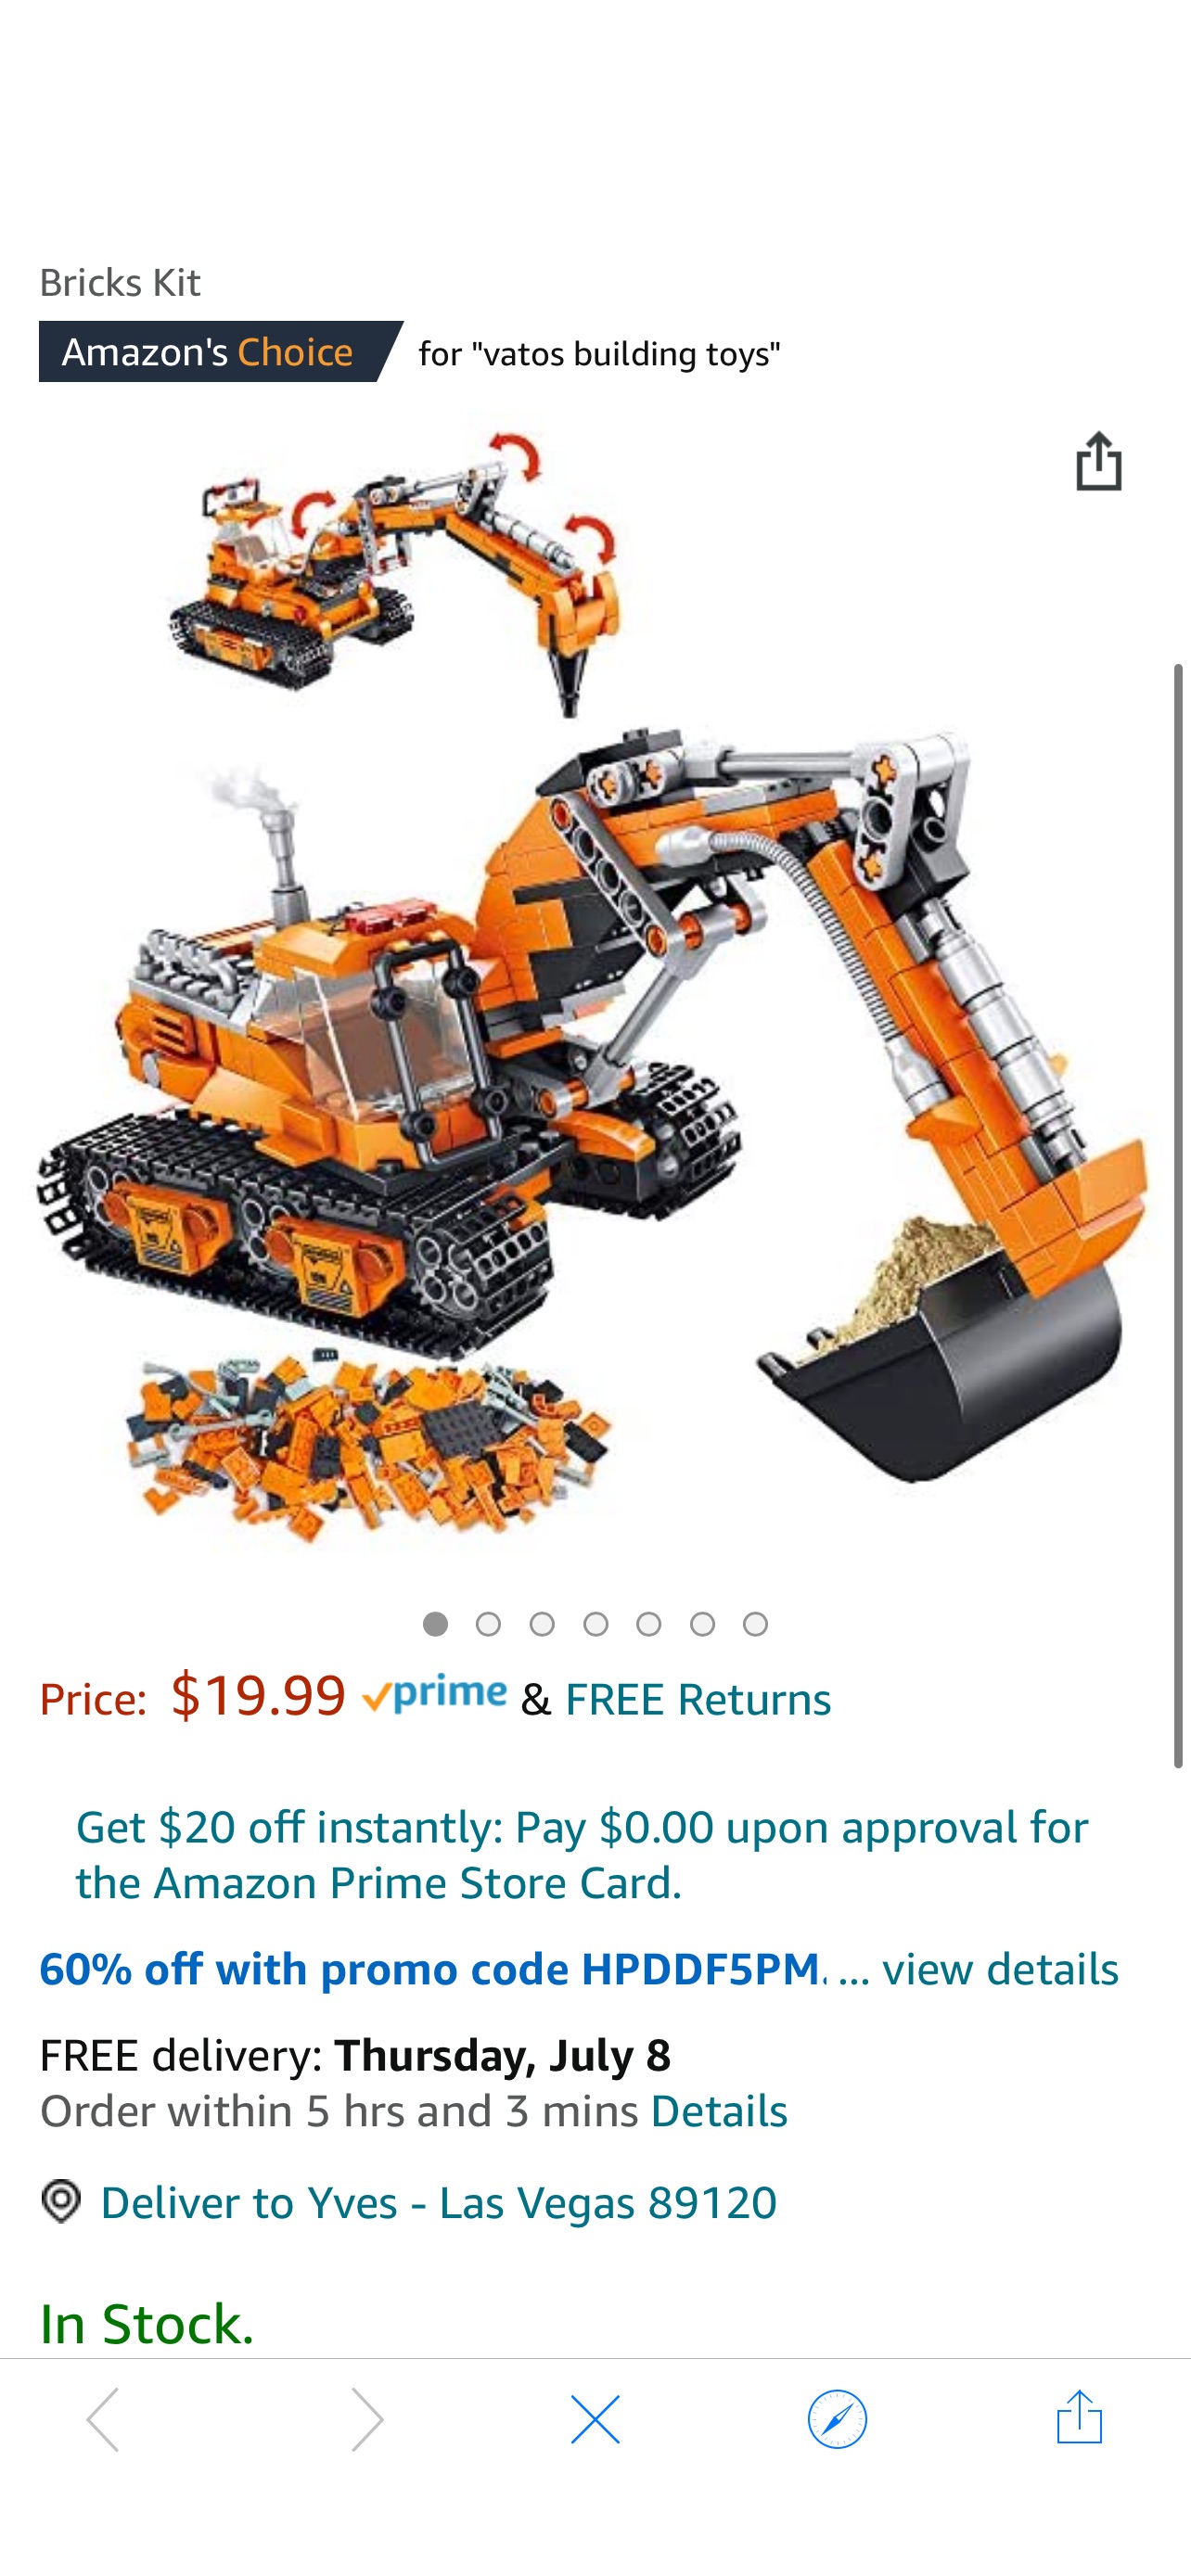 Amazon.com: VATOS 积木Building Sets for Kids, Building Kit for Boys 6 7 8 9 10 11 12 Years Old, 513 PCS 2 in 1 Excavator or